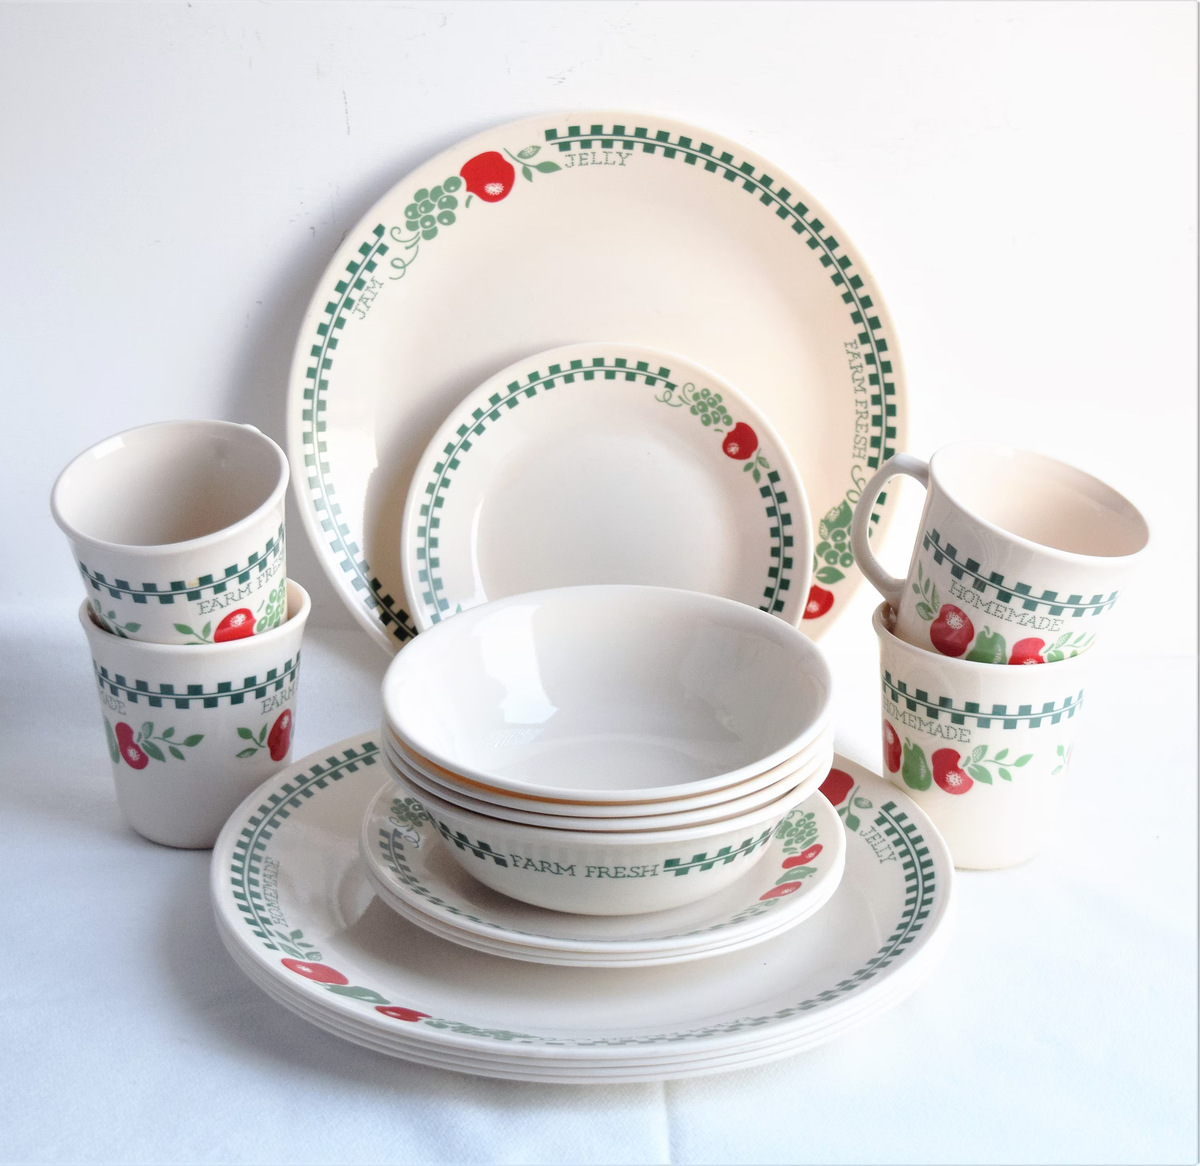 What Brands Of Dinnerware Are Made In The USA?